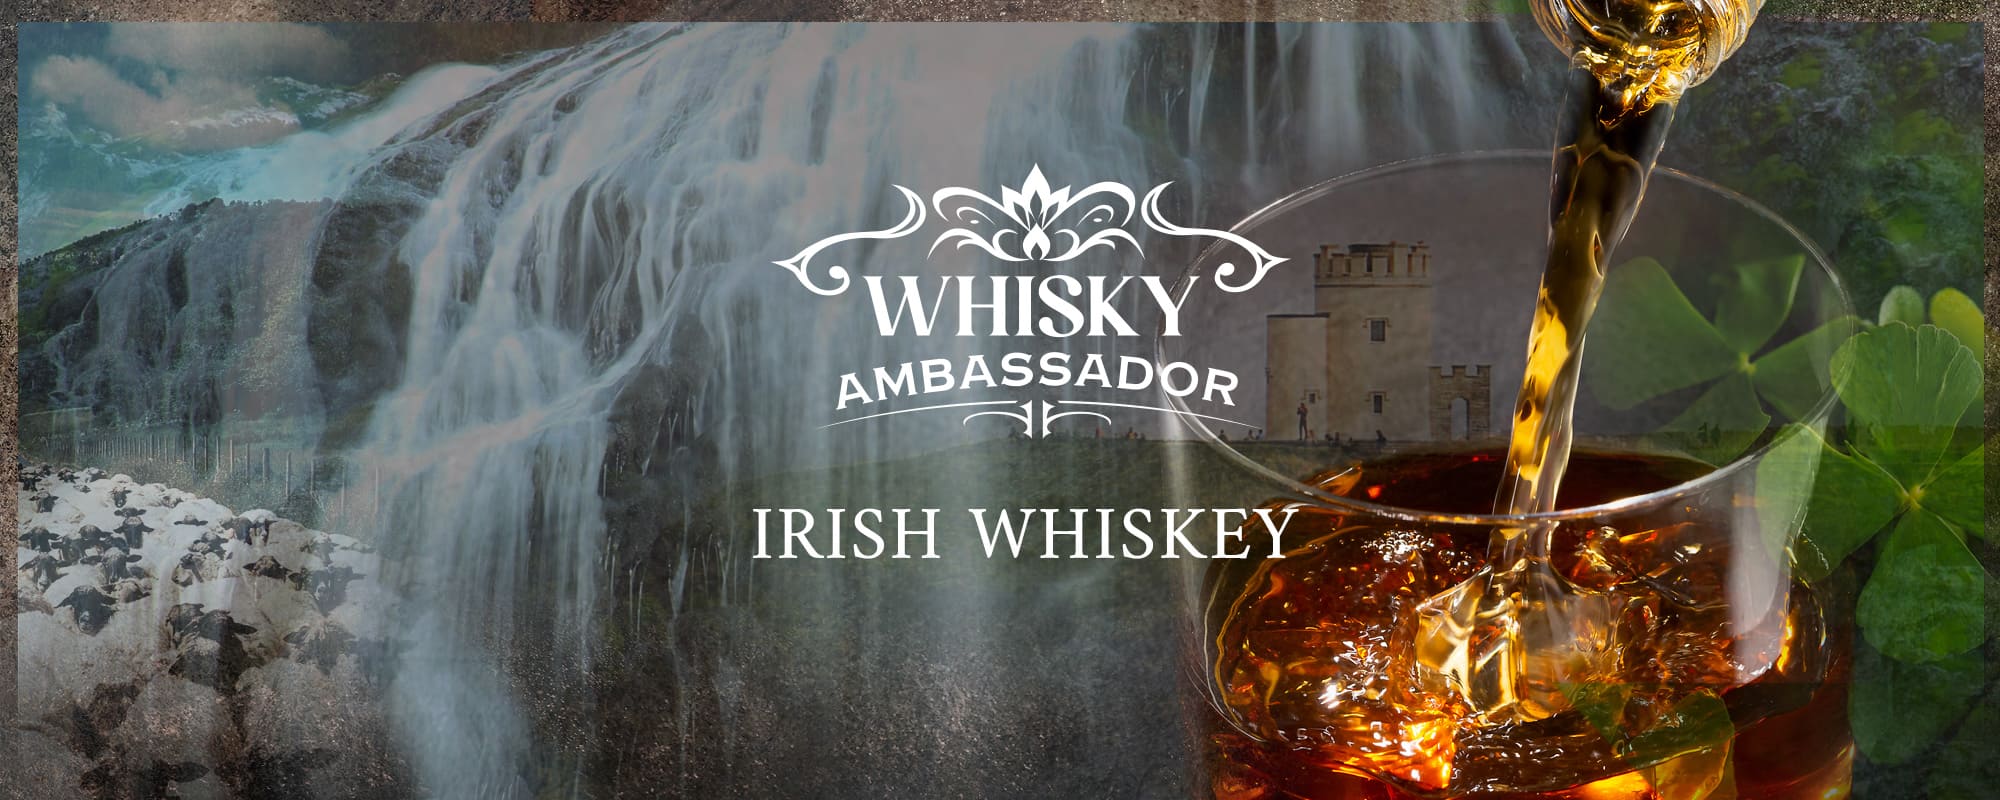 Irish Whisk(e)y Online Store⭐ At the lowest prices.